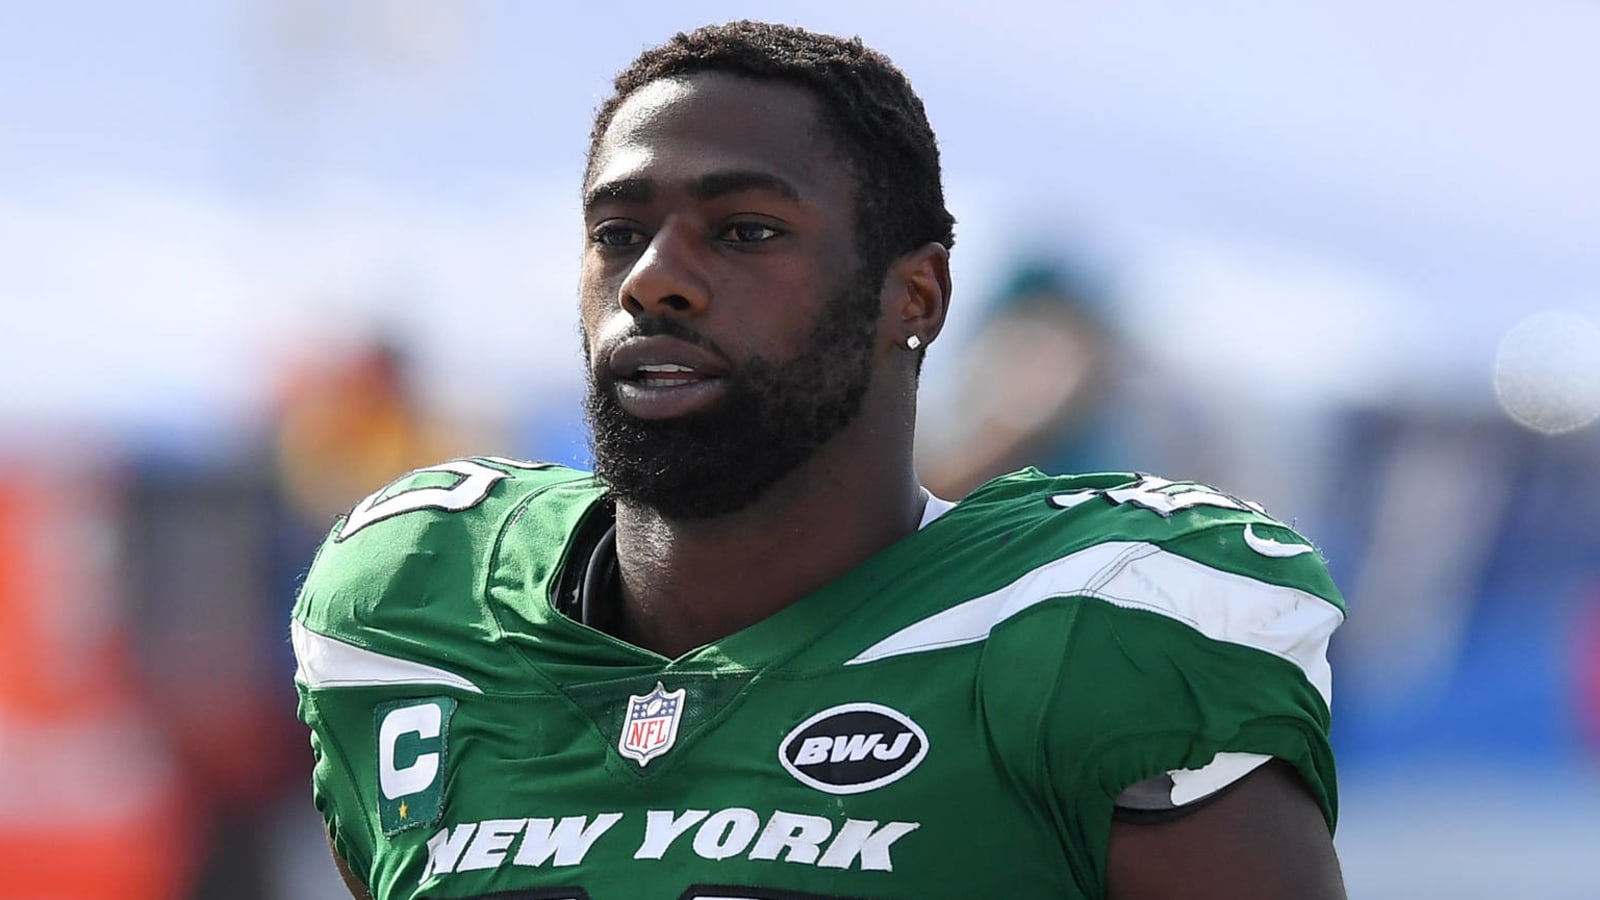 Jets safety Marcus Maye charged with DUI